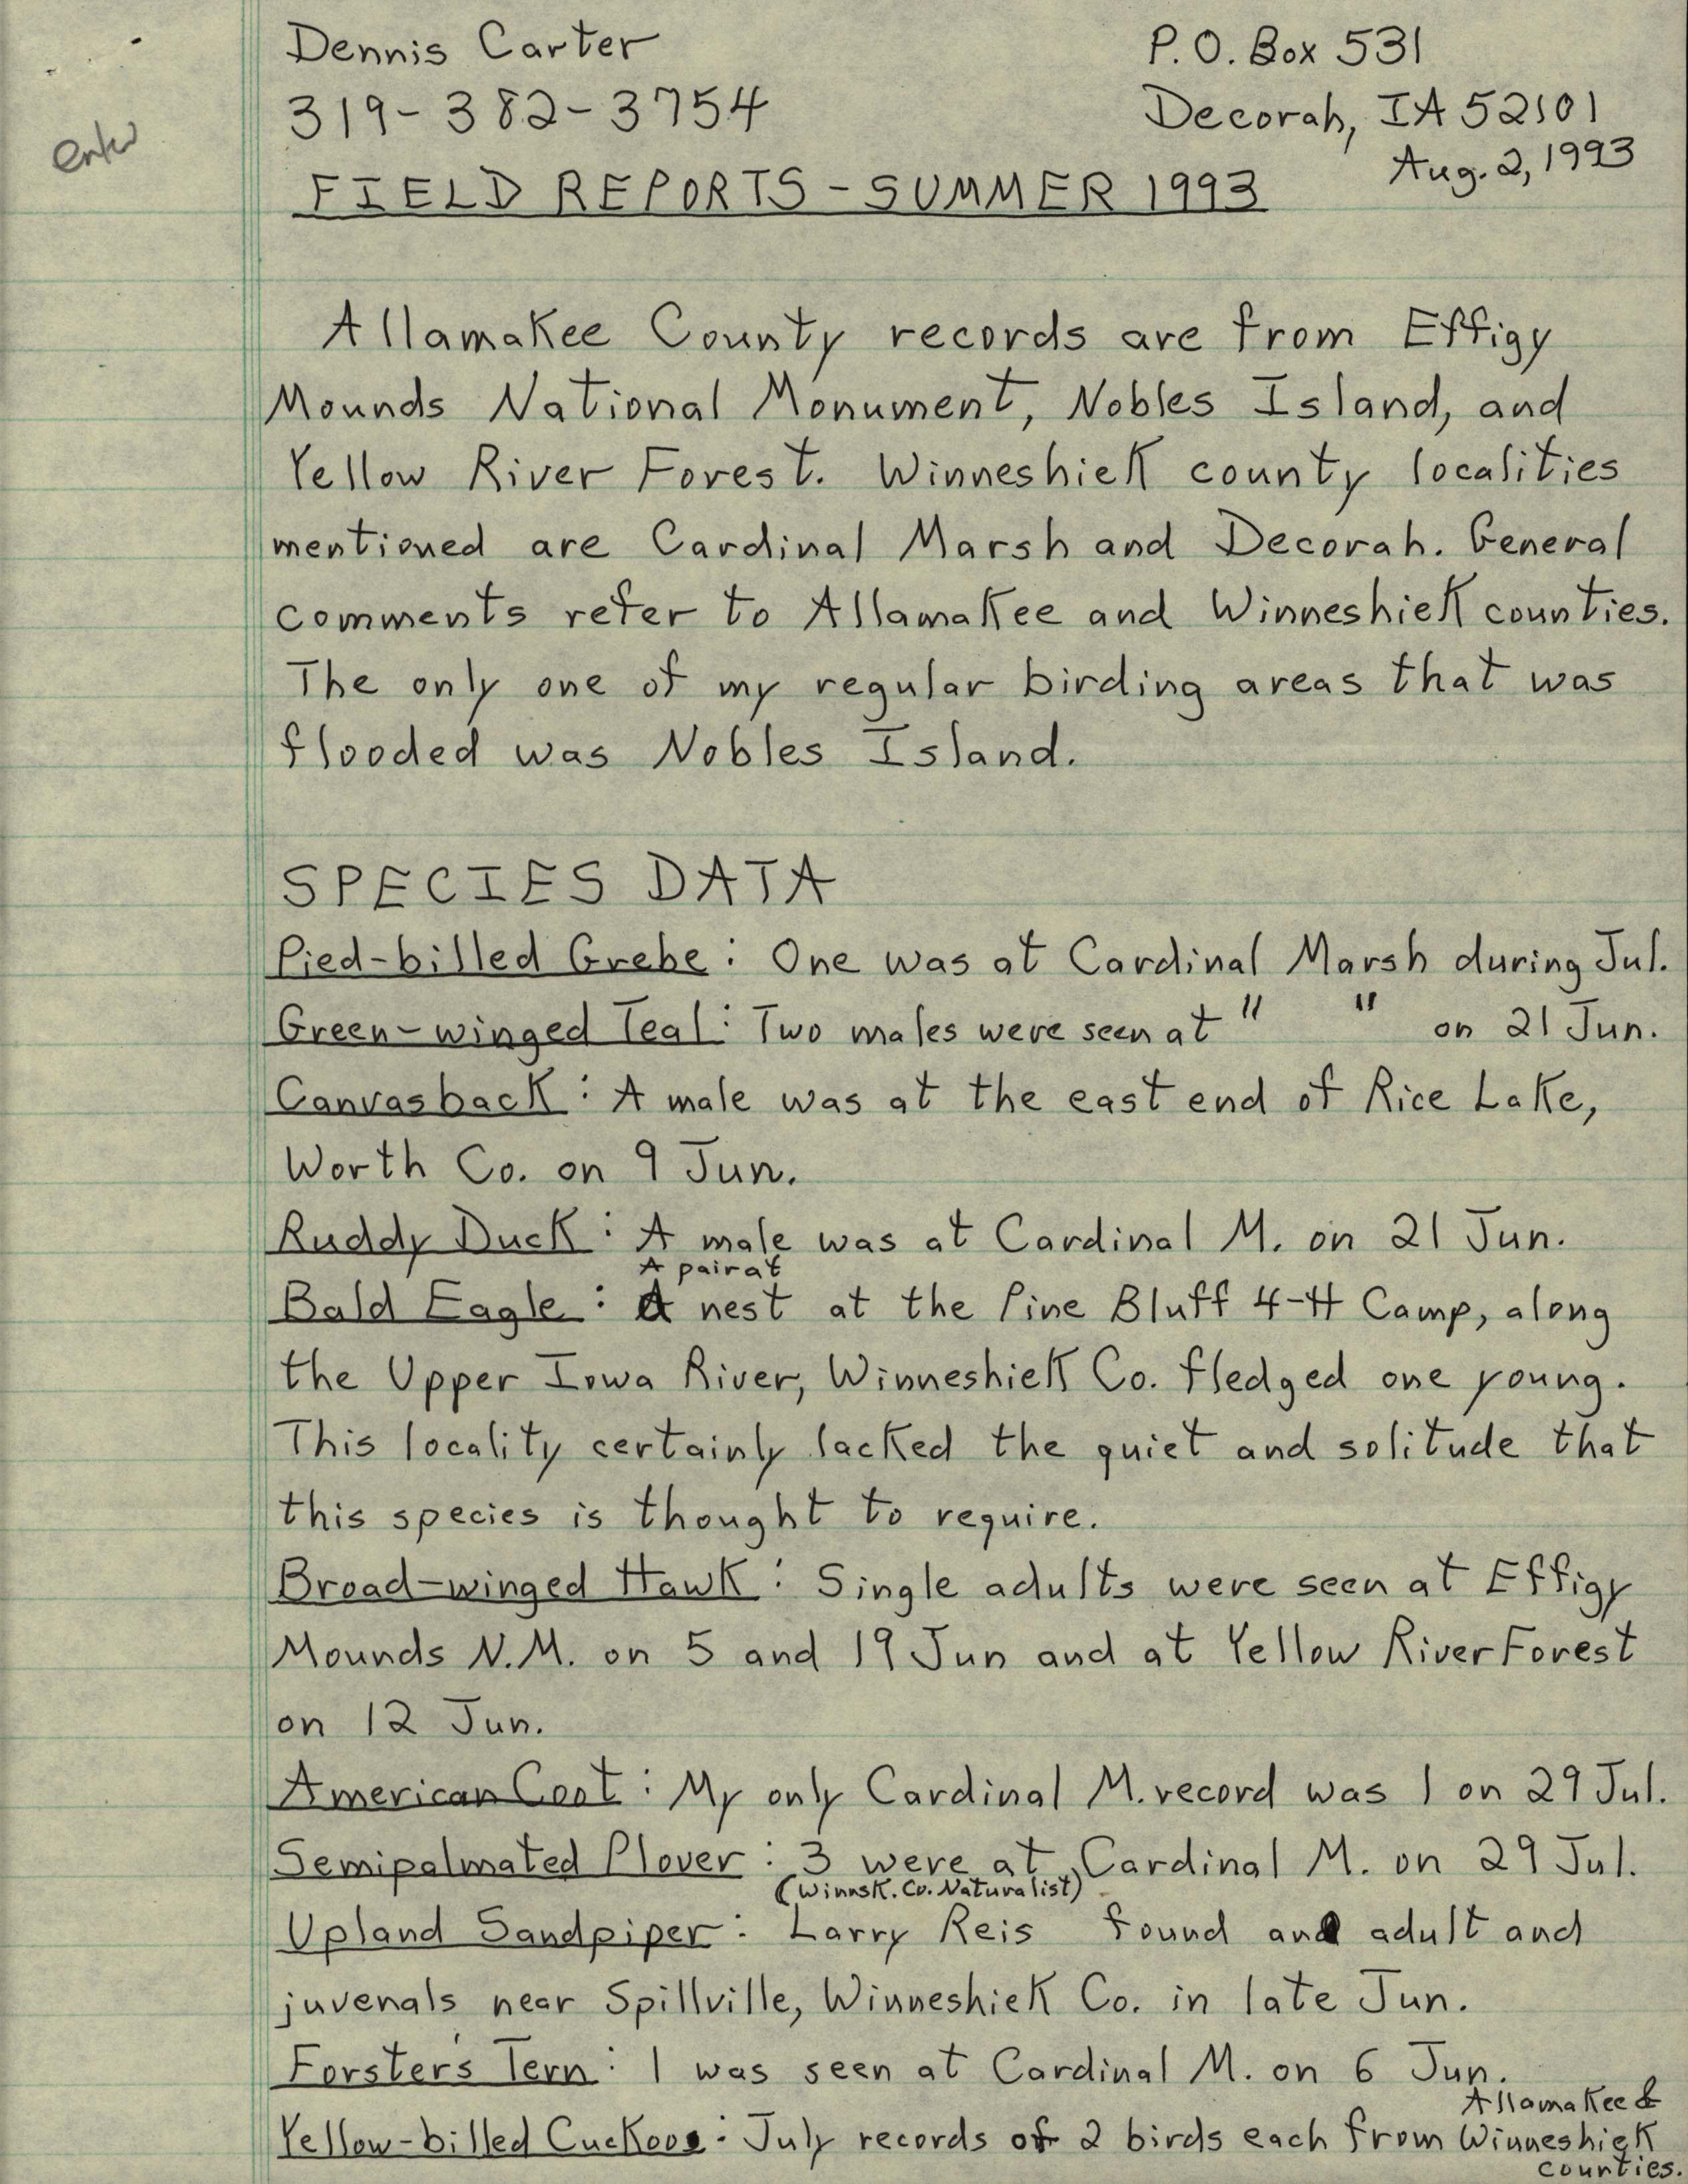 Field notes contributed by Dennis L. Carter, August 2, 1993